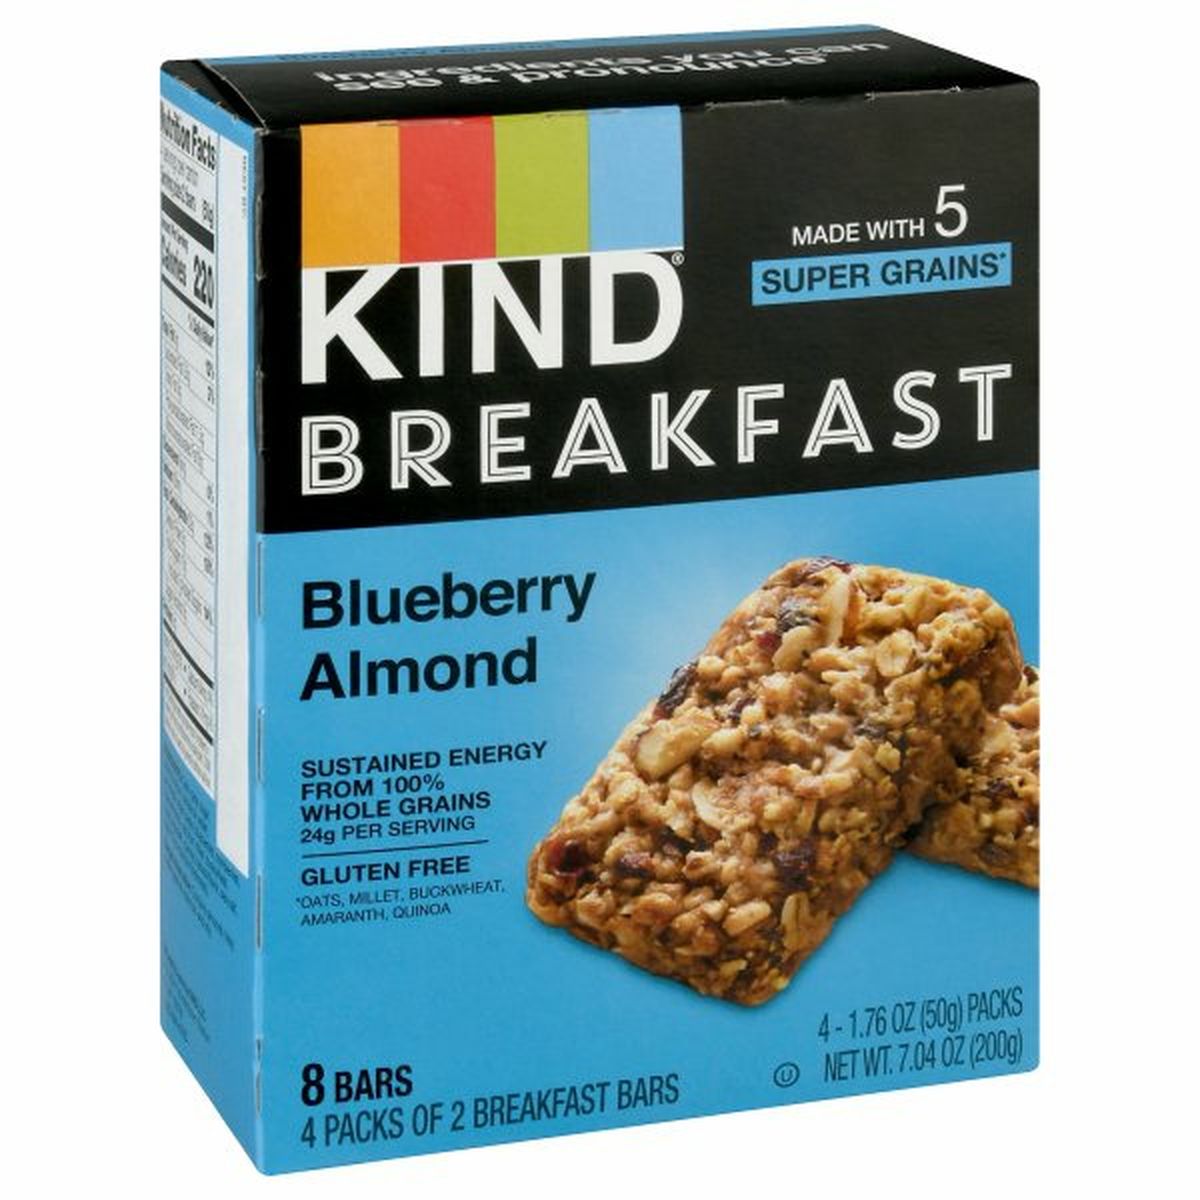 Calories in KIND Breakfast Bars, Blueberry Almond